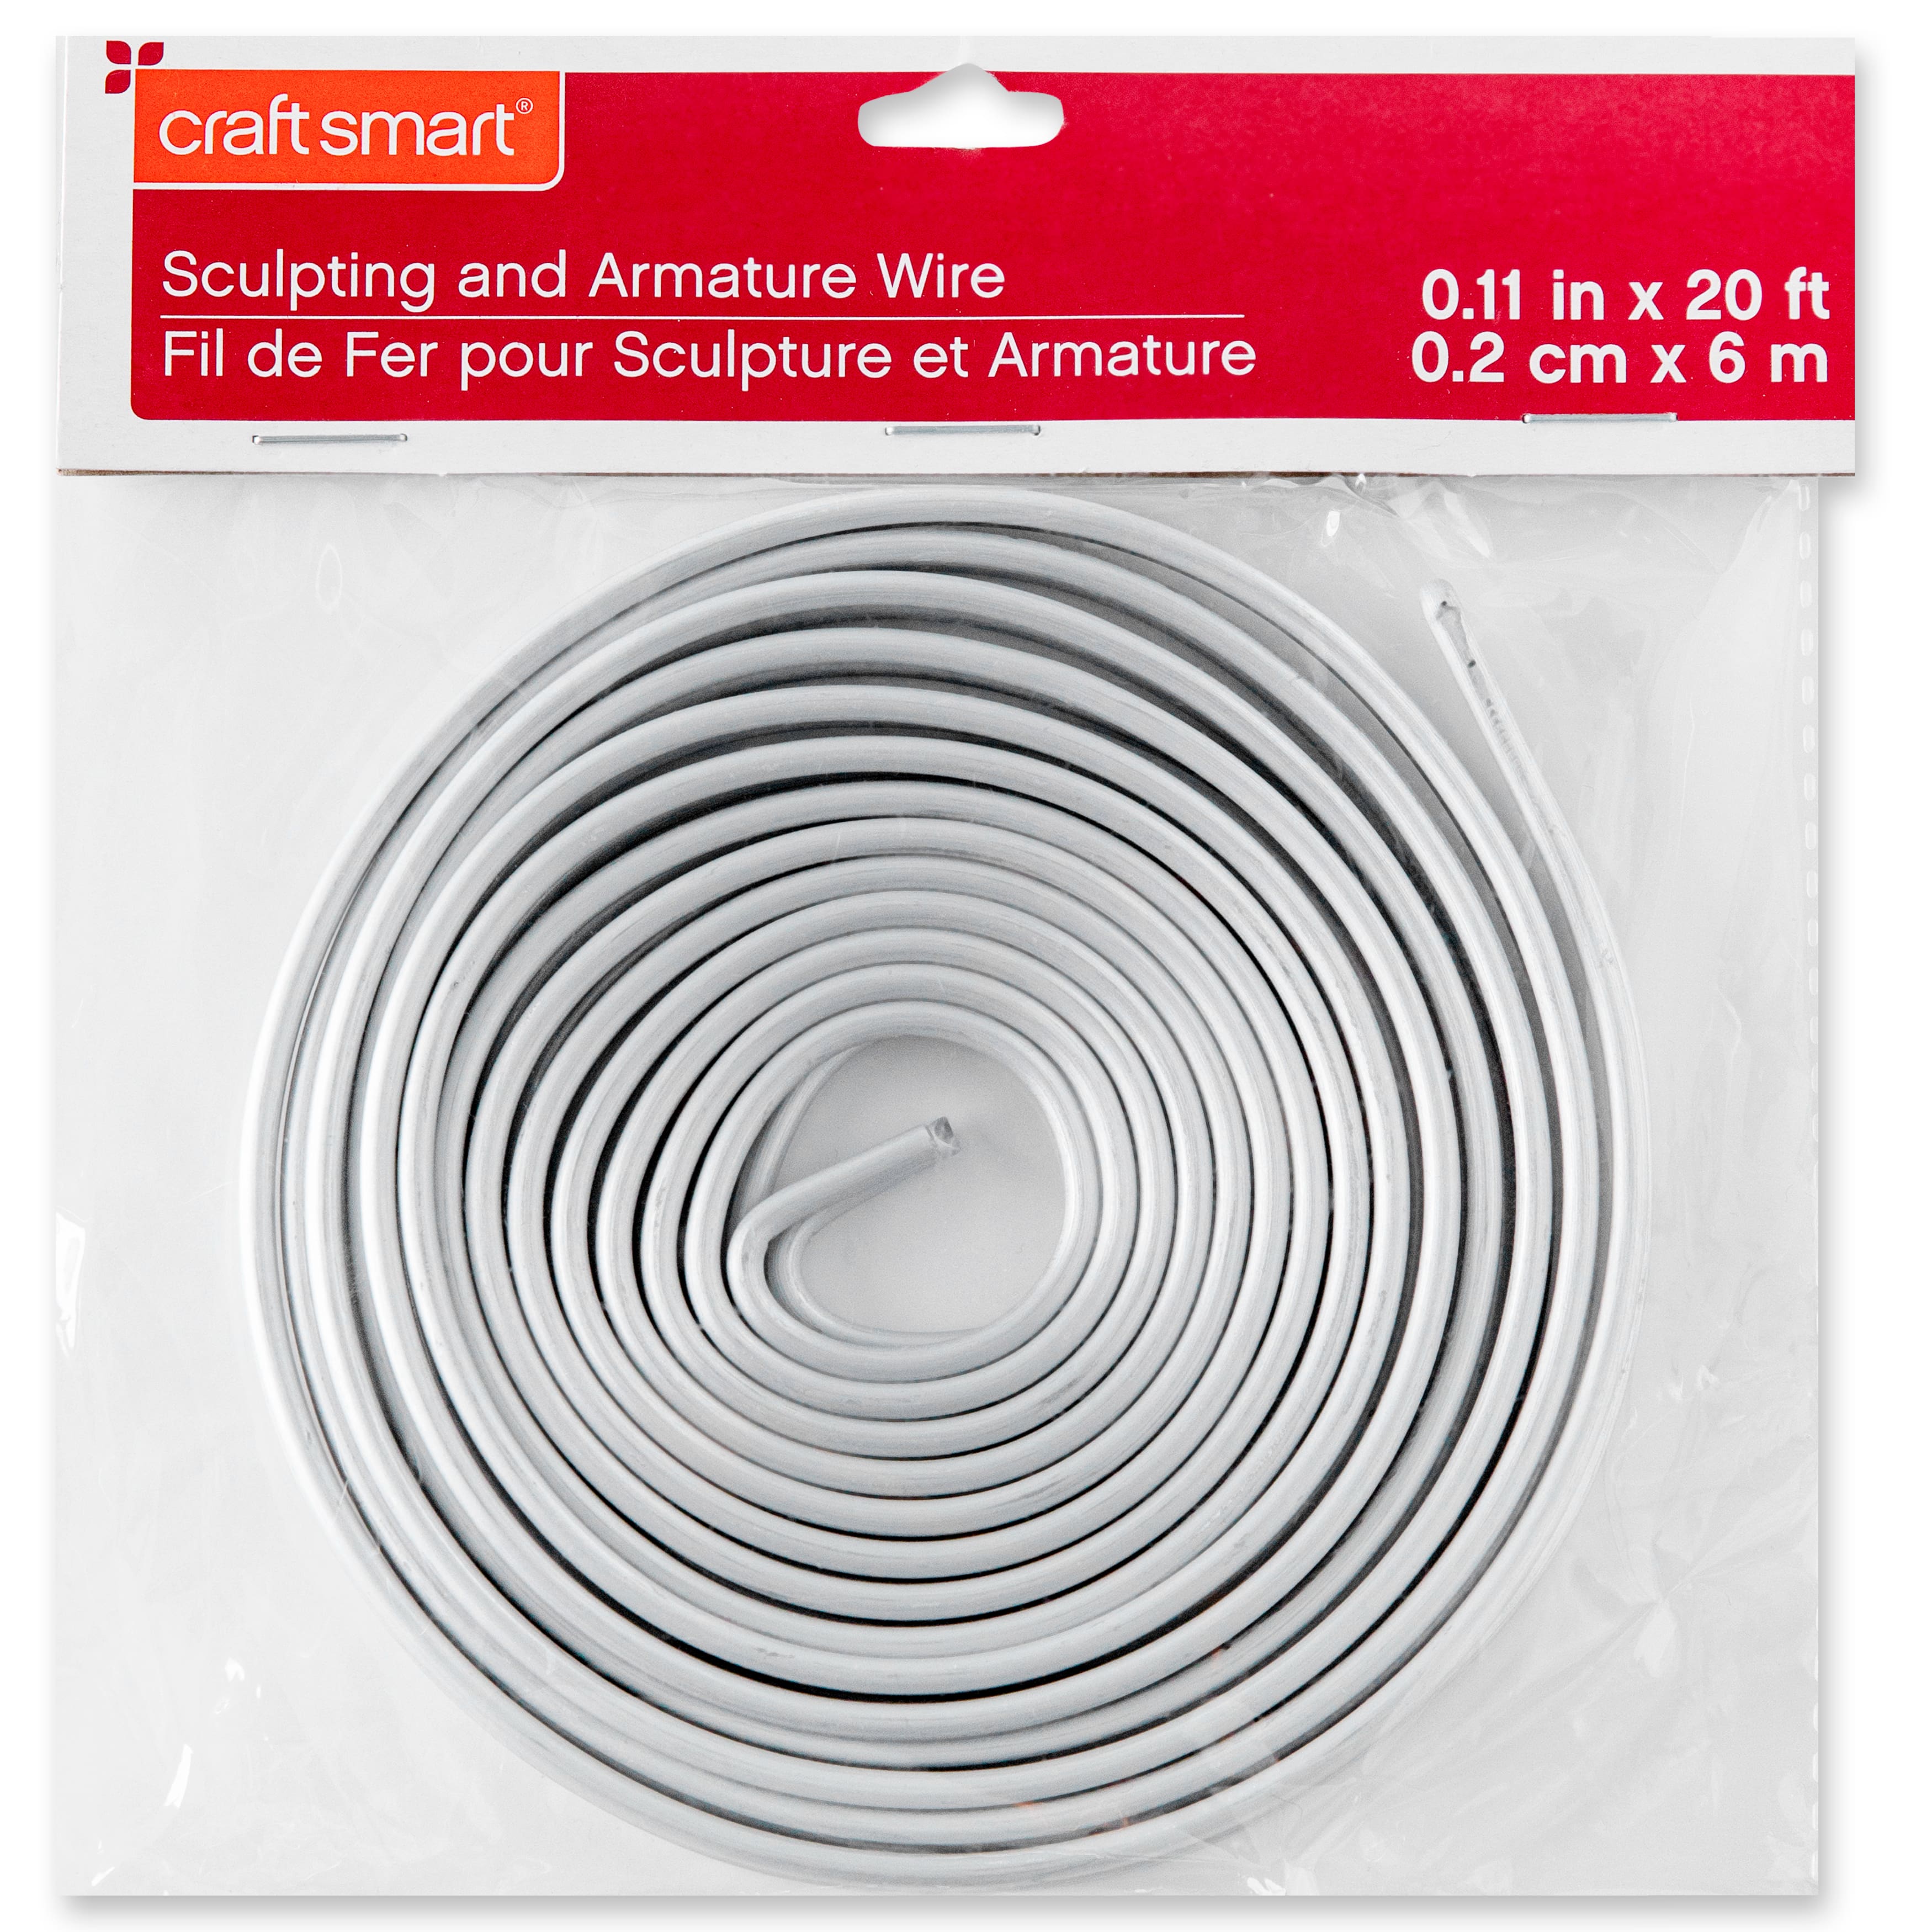 KISSITTY 8 Rolls 6 Gauge Aluminum Wire for Crafting Sculpting Wire